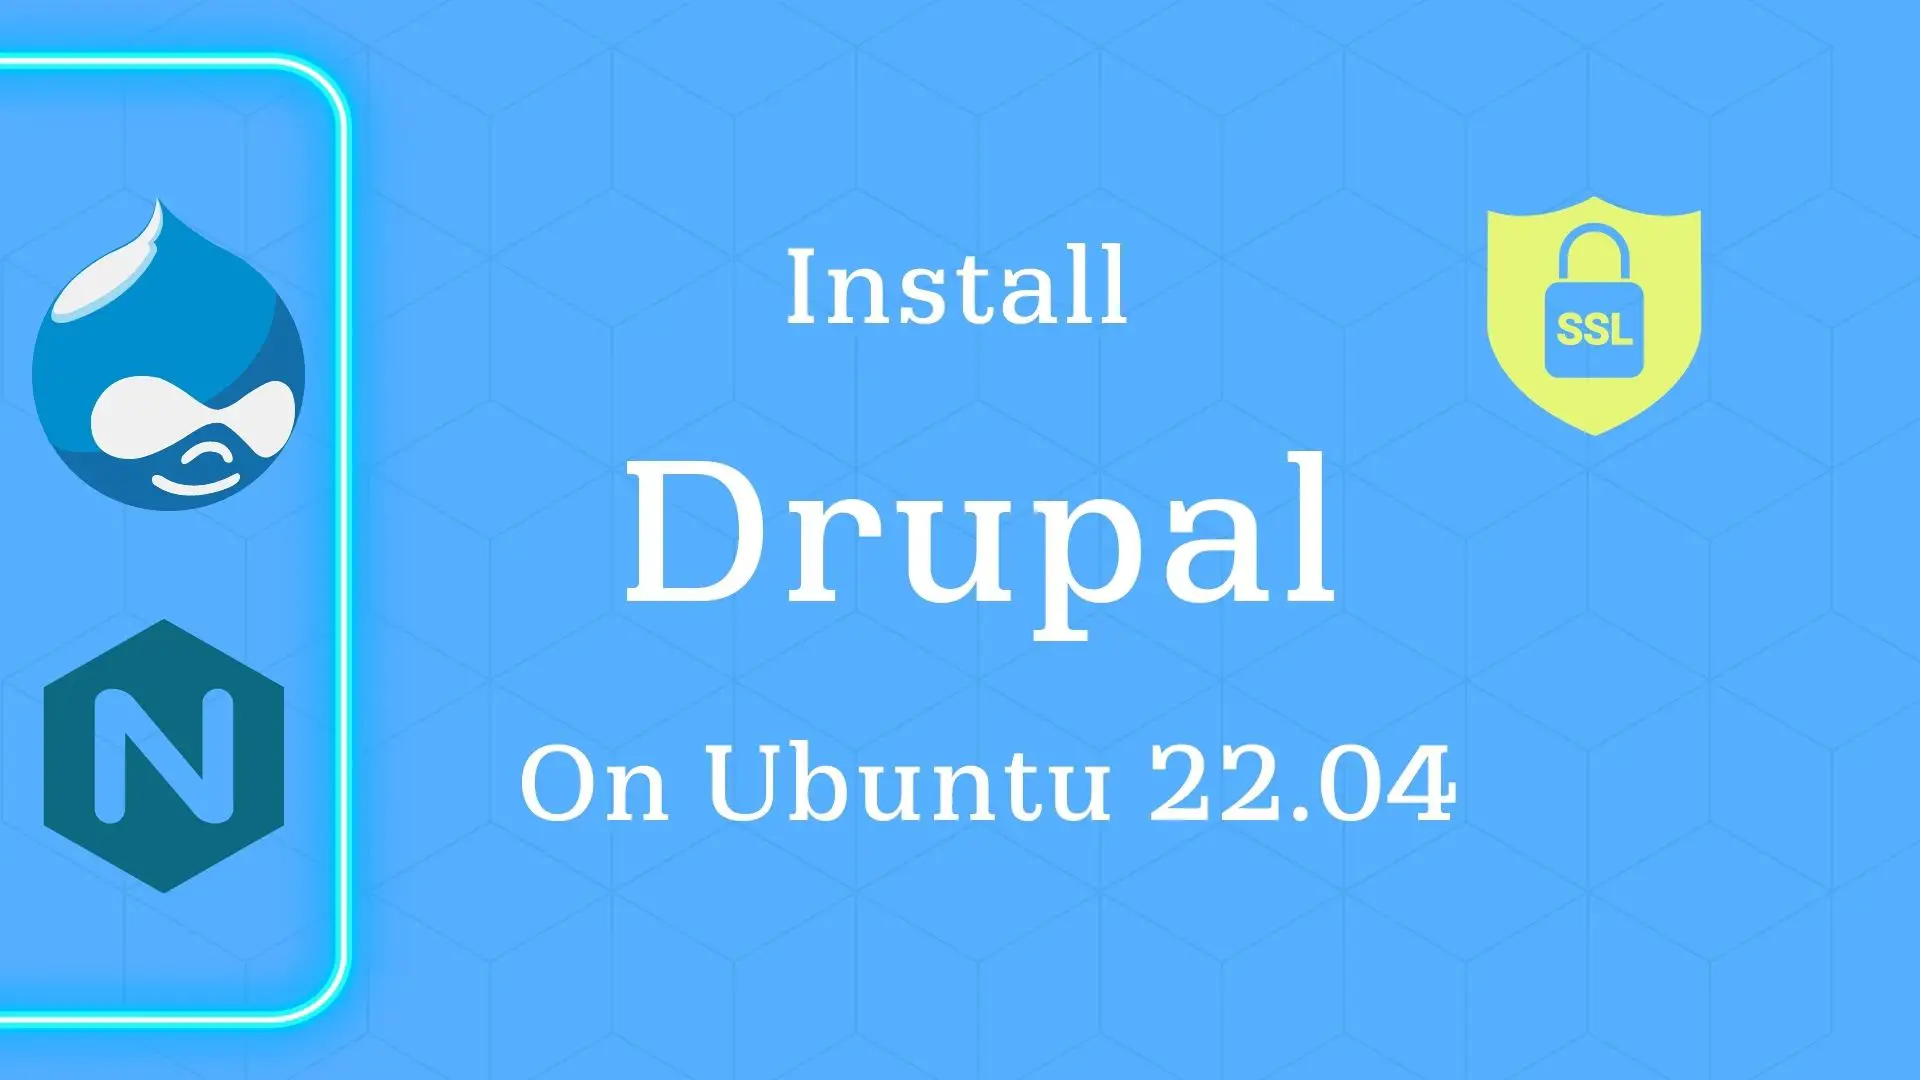 Install Drupal with Nginx and Let's Encrypt SSL on Ubuntu 22.04